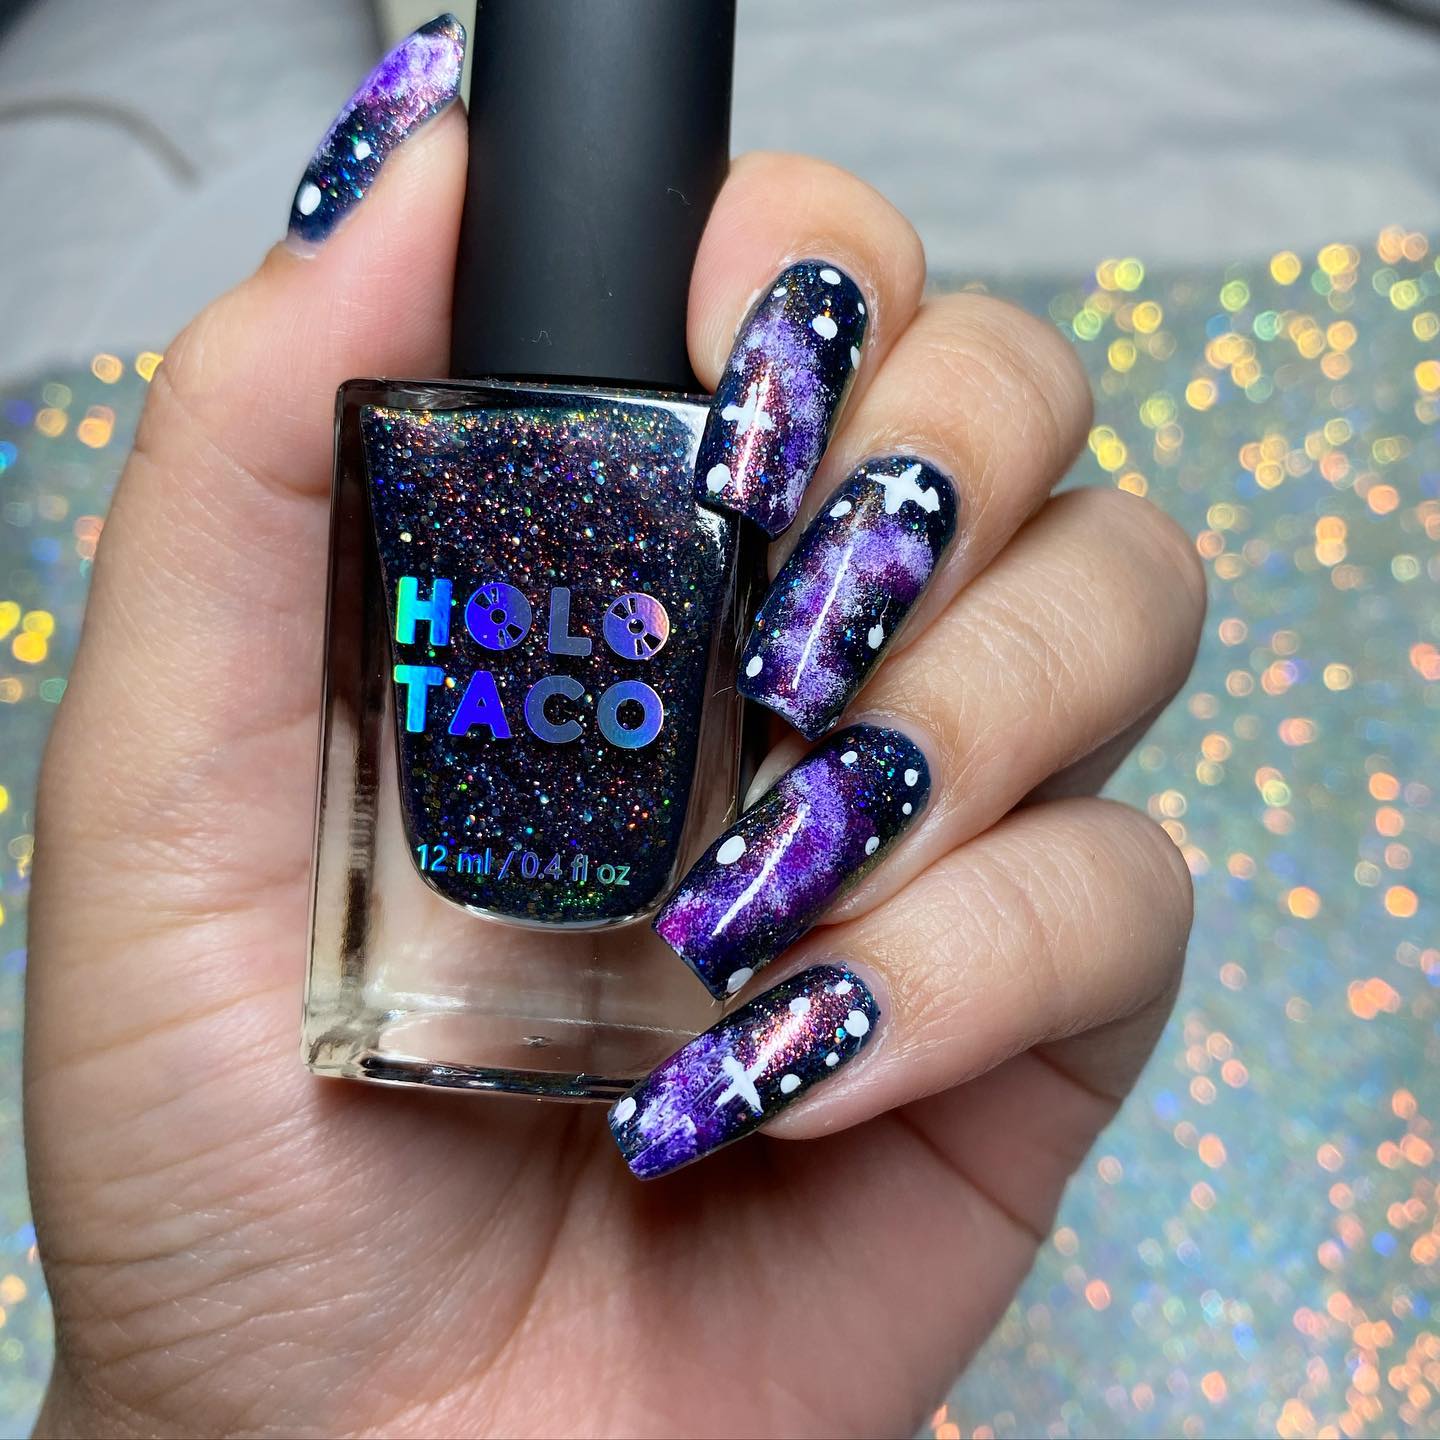 Long Square Glossy Purple Galaxy Nails with White Dots